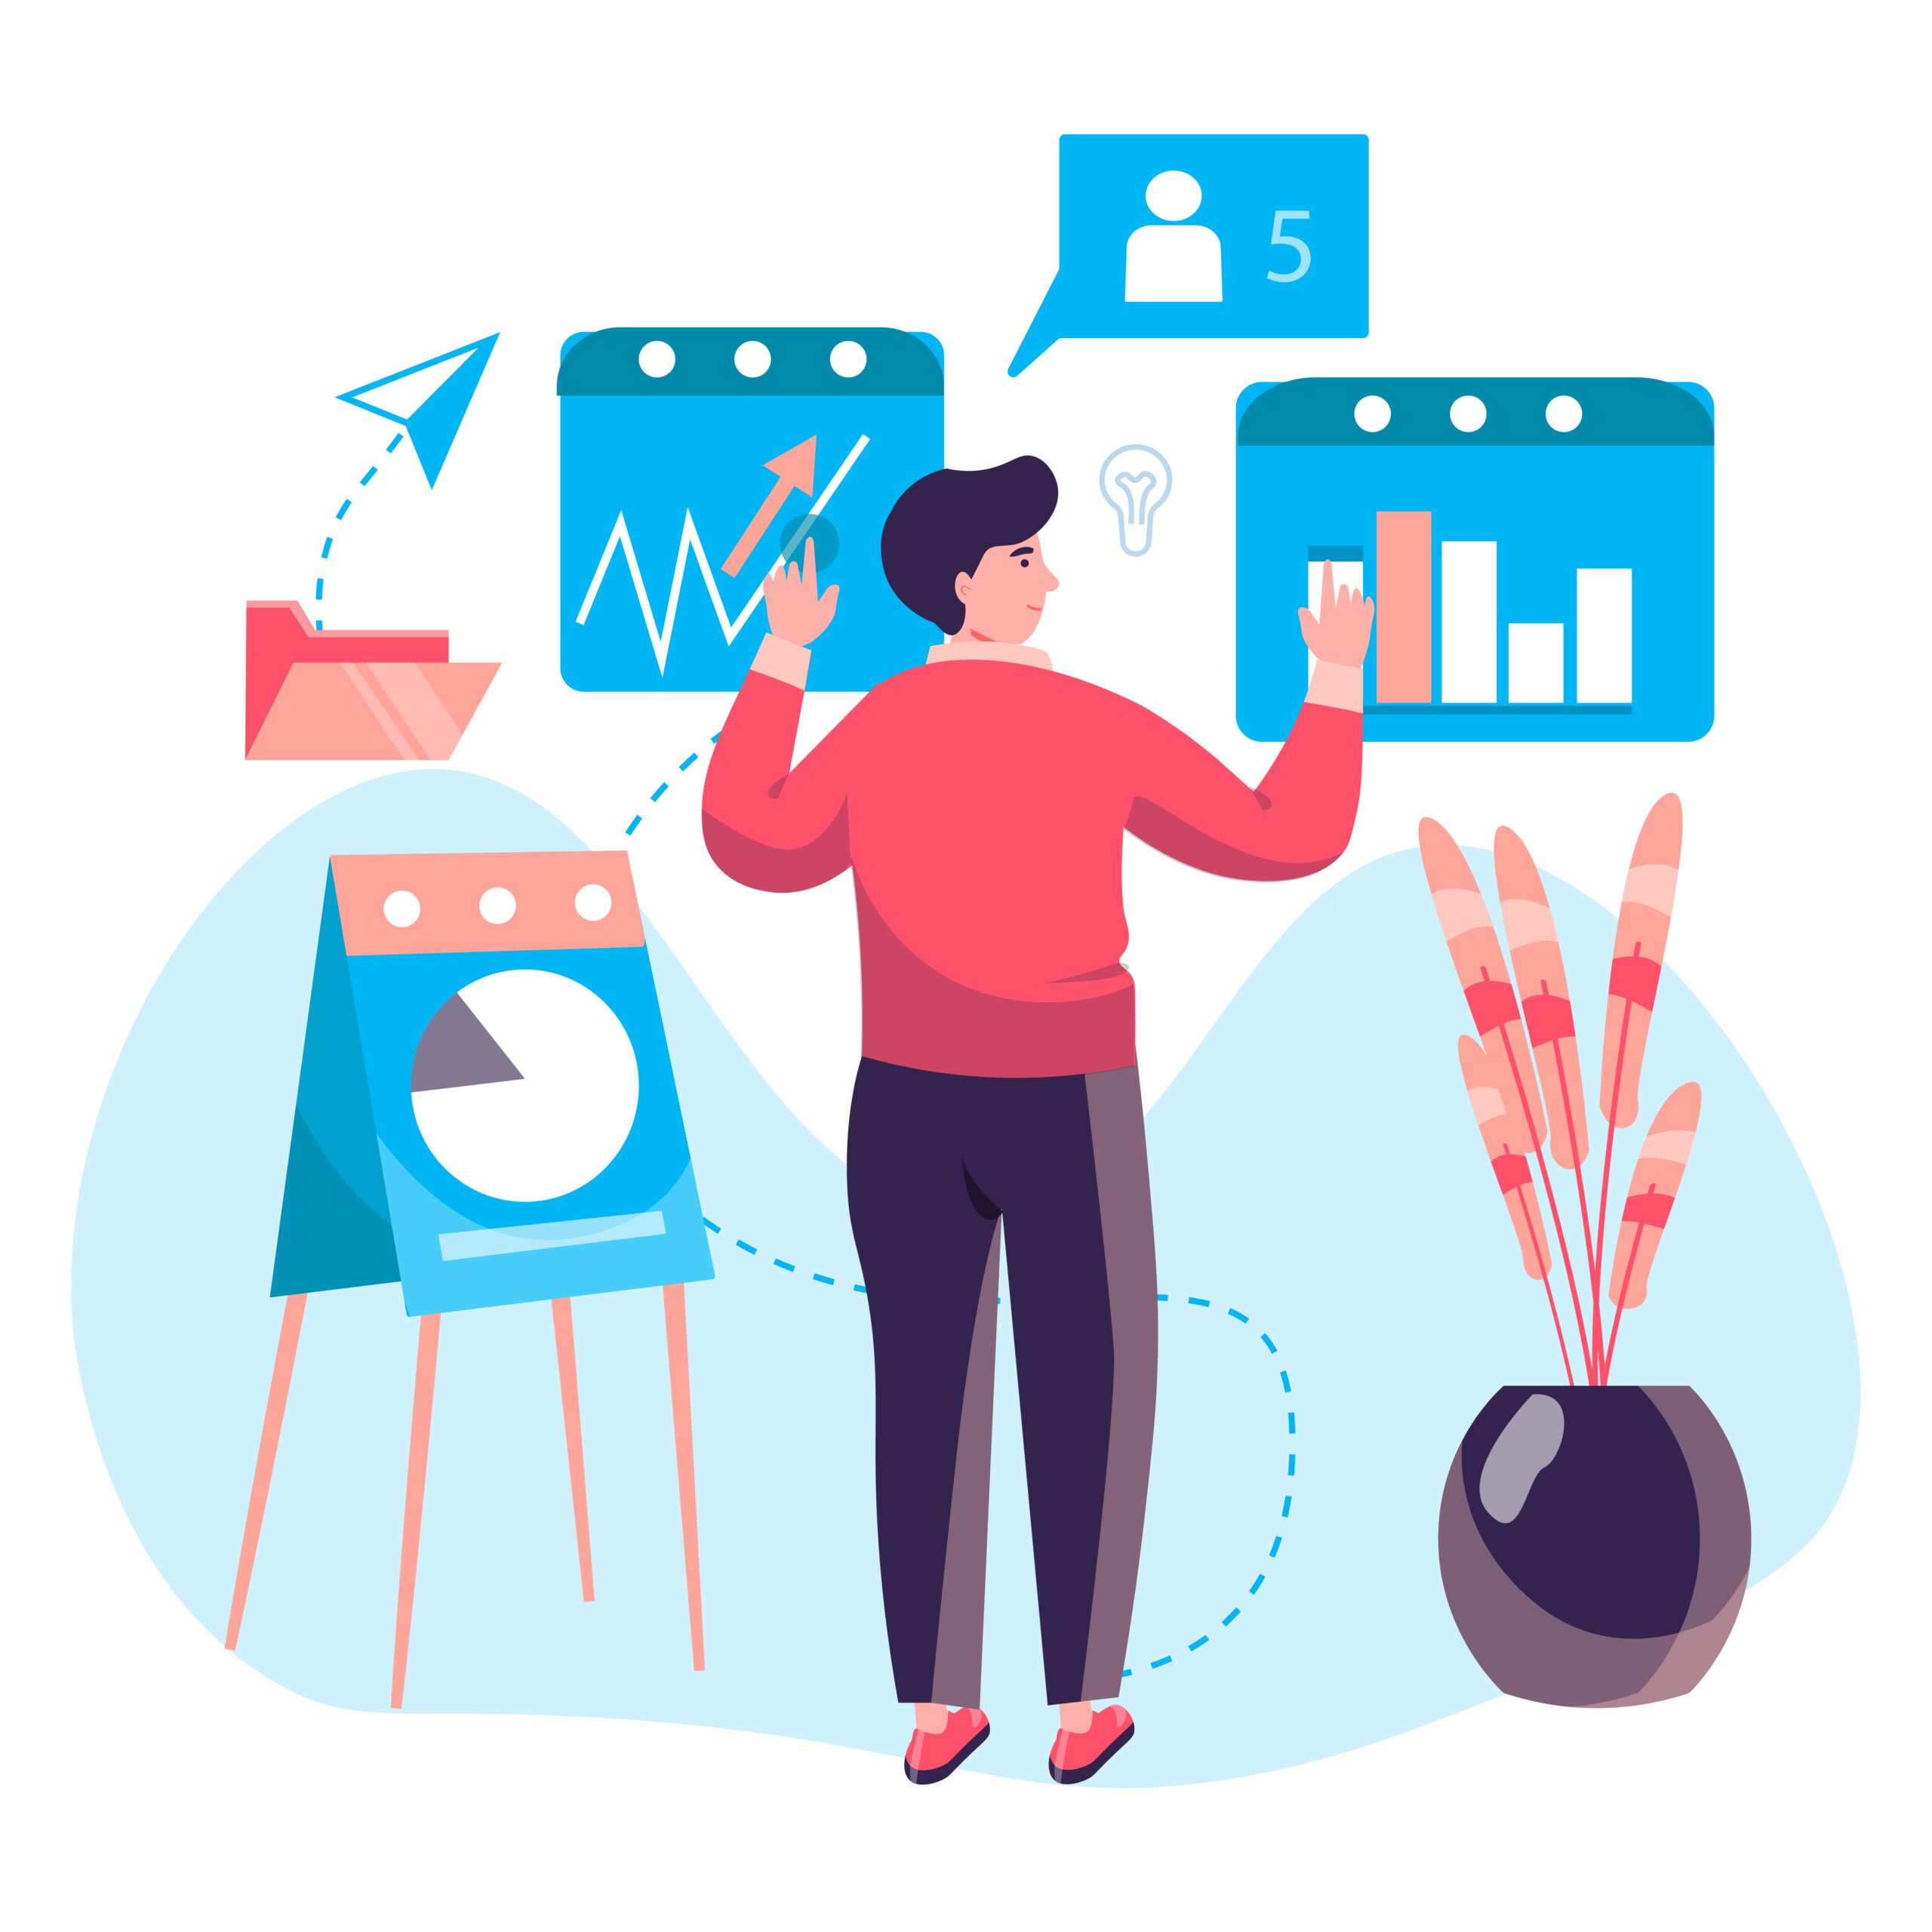 Business process concept. Man analyzes data and company statistics, makes presentation with report. Accounting and consulting character scene. Vector illustration in flat design with people activities